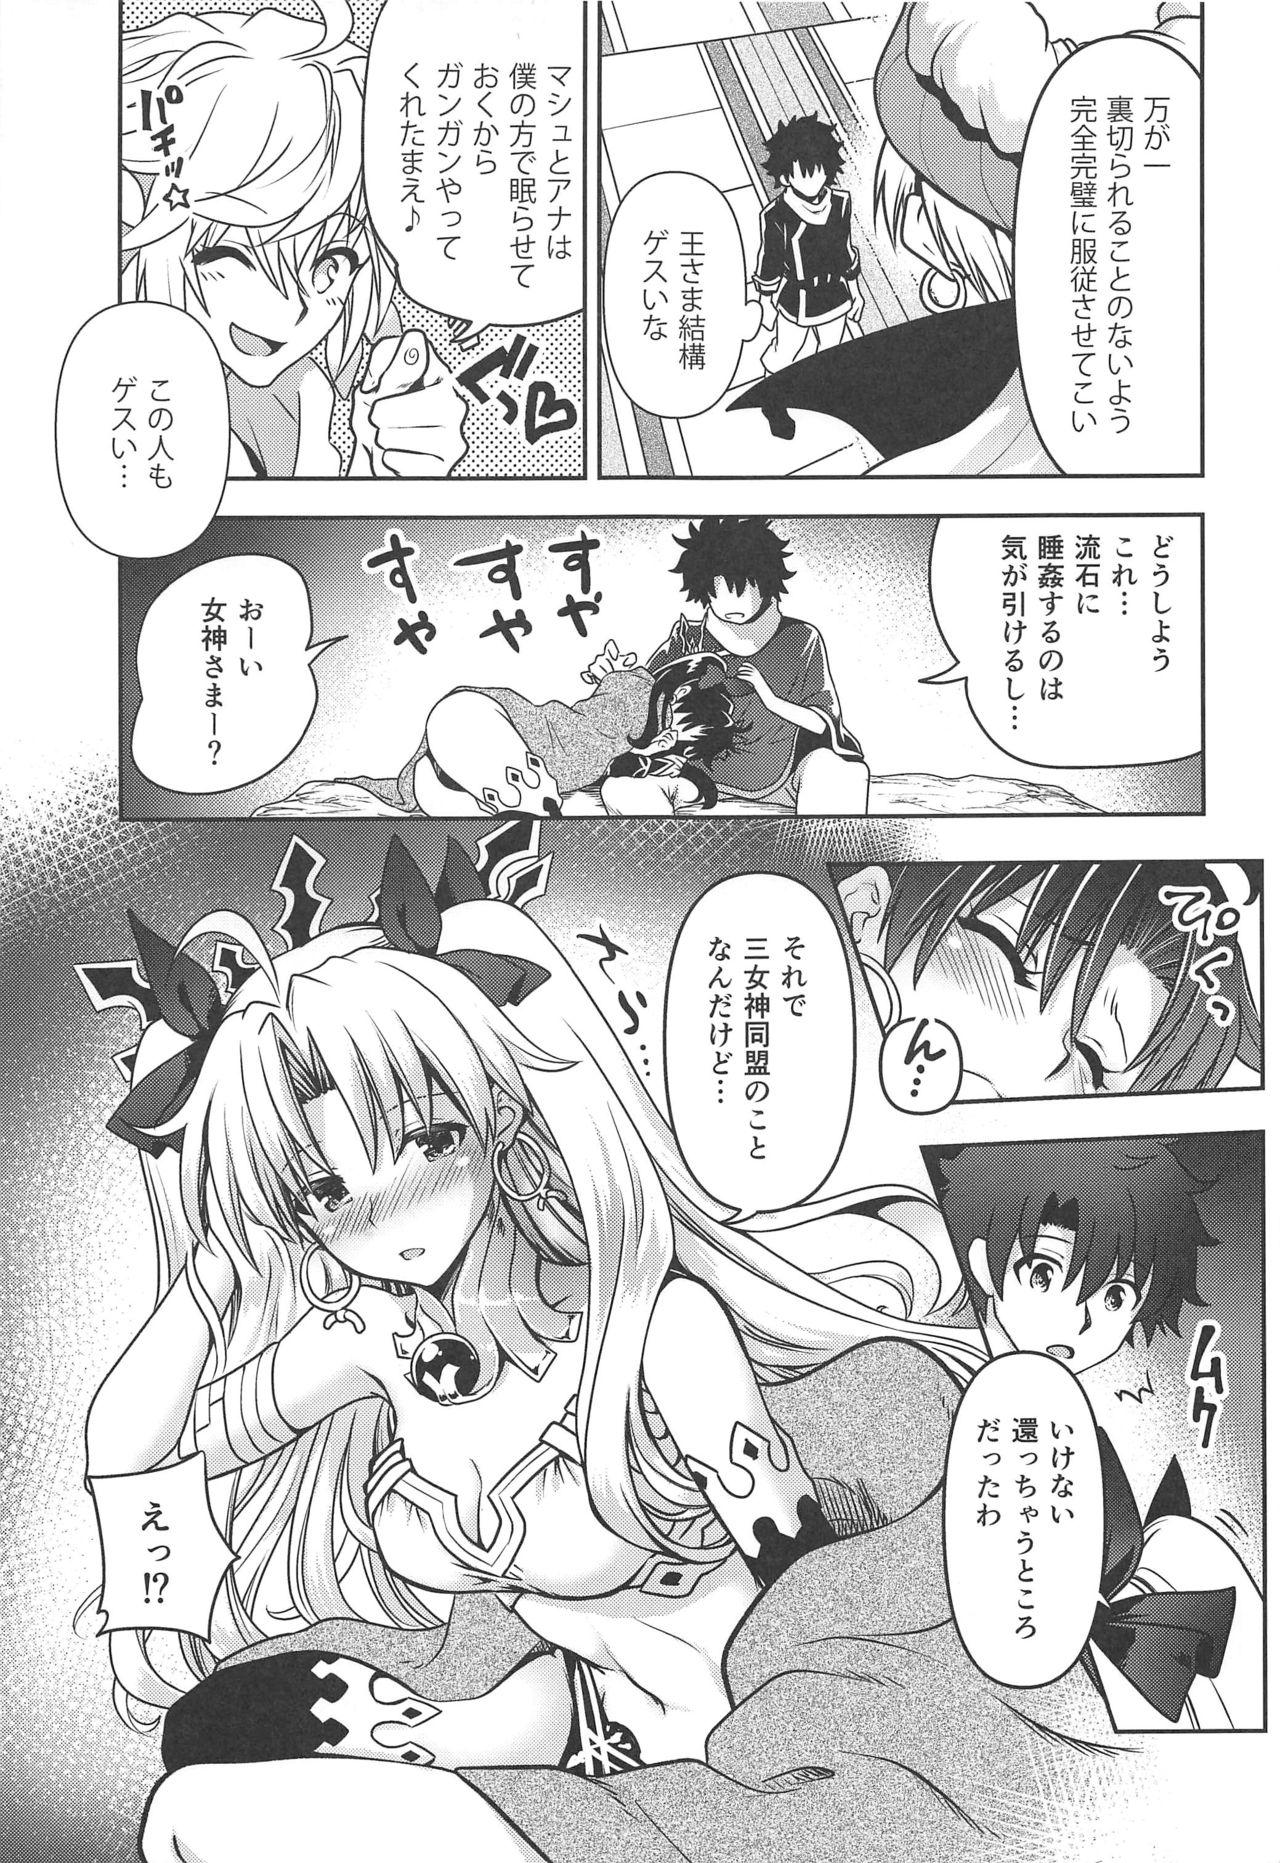 Hair All Night Romance - Fate grand order Women - Page 4